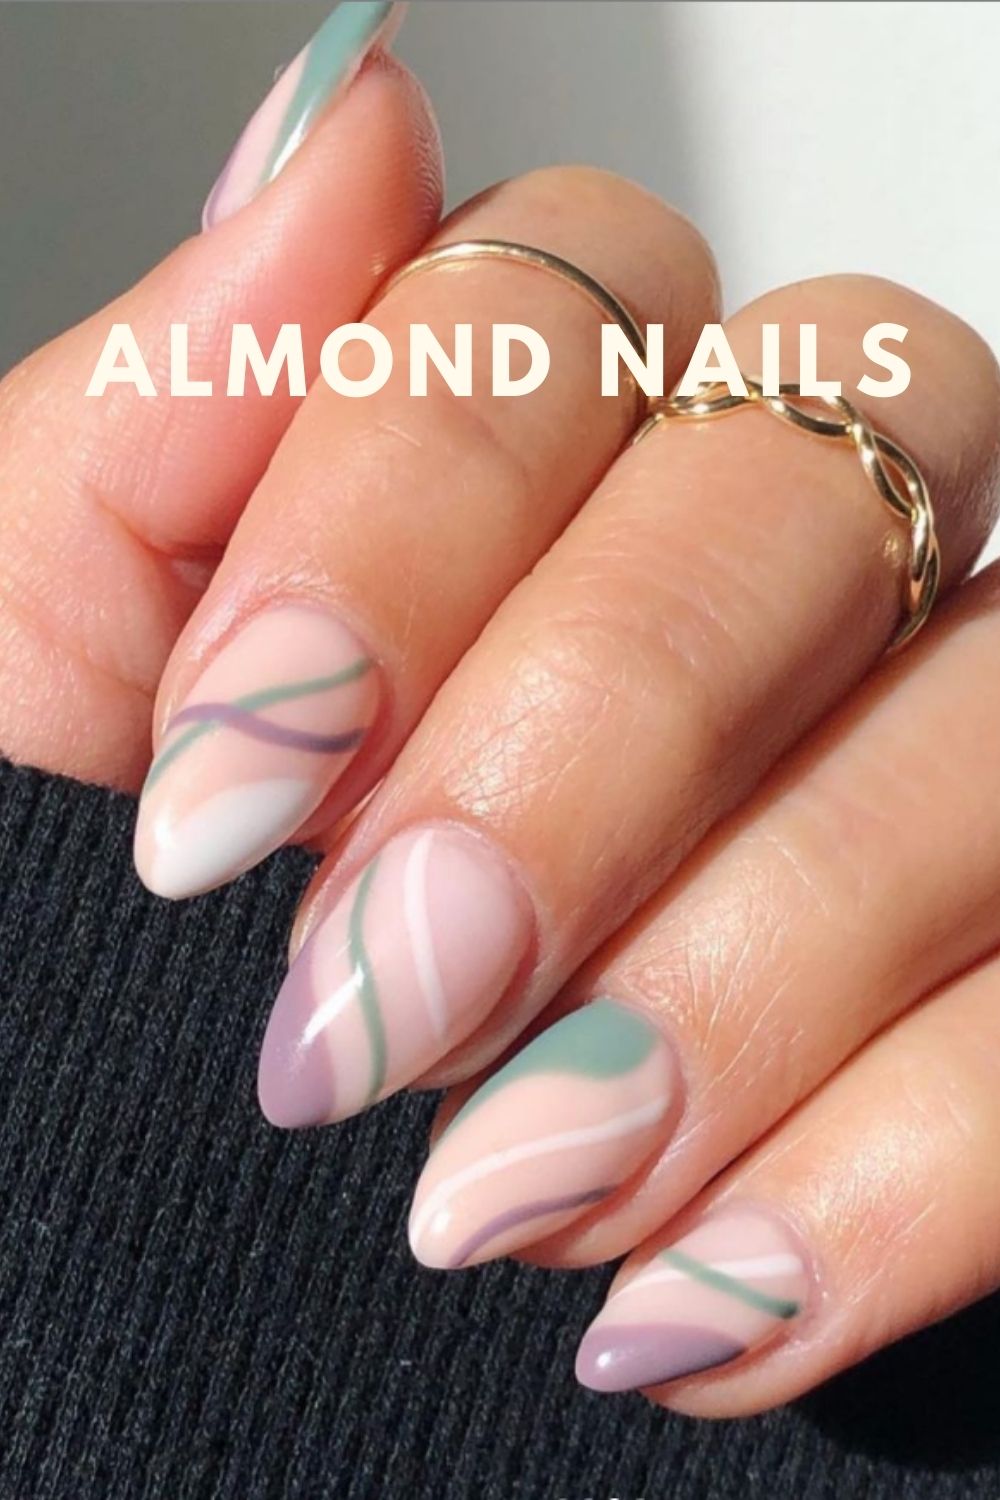 Almond-Shaped Nails Art for Autumn Nails 2021